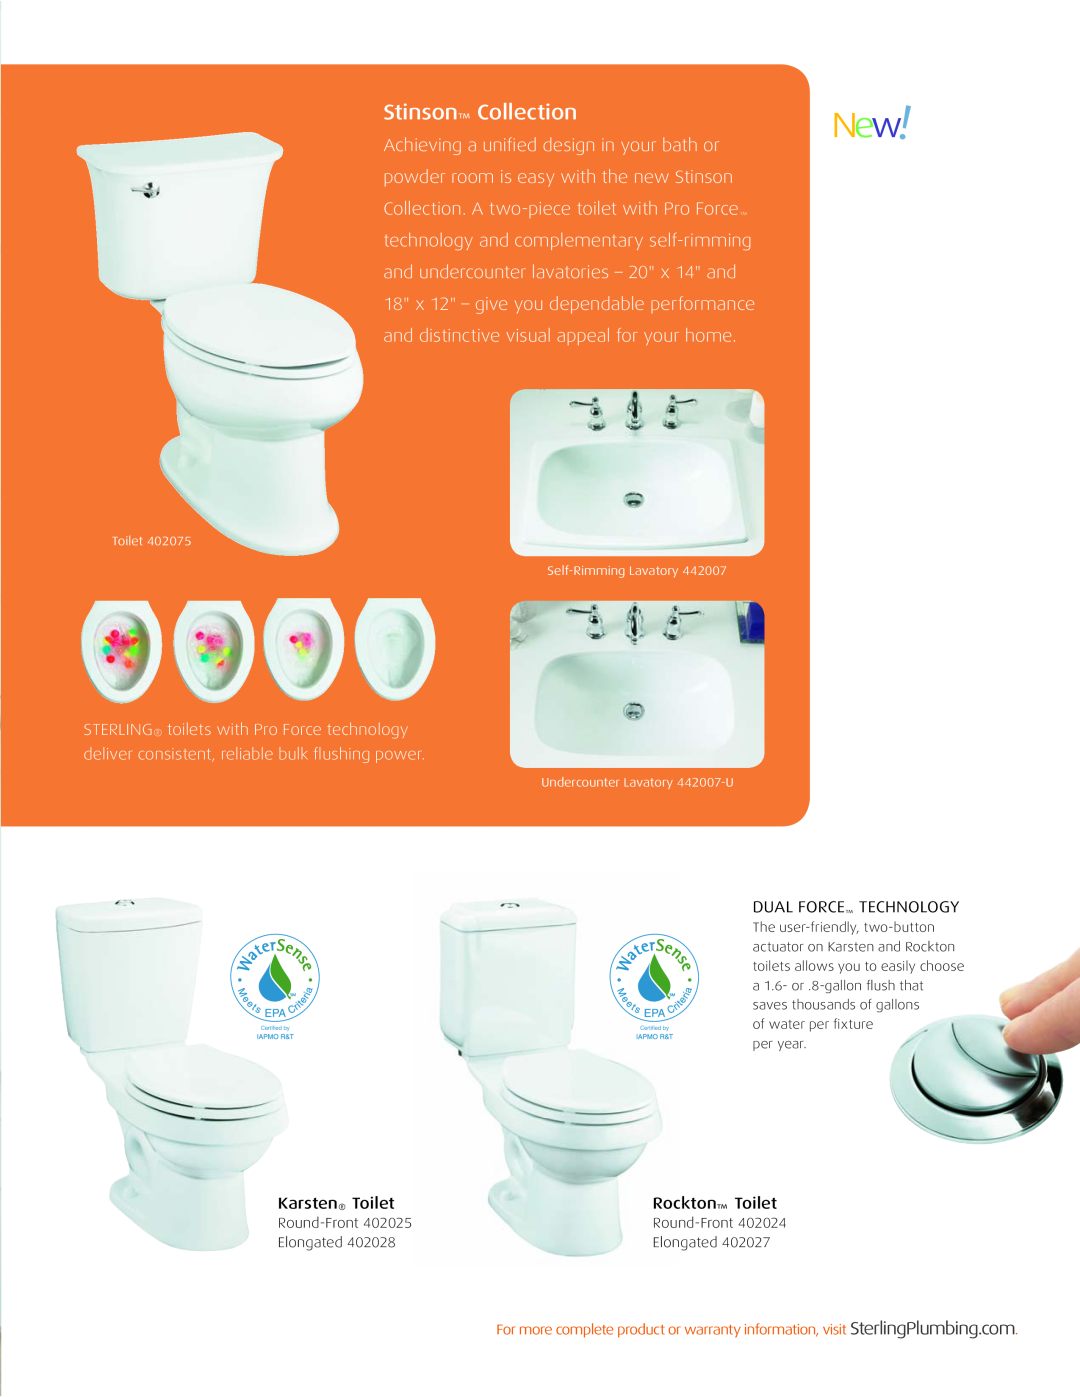 Sterling Plumbing Toilet & Lavatories manual Stinson Collection 